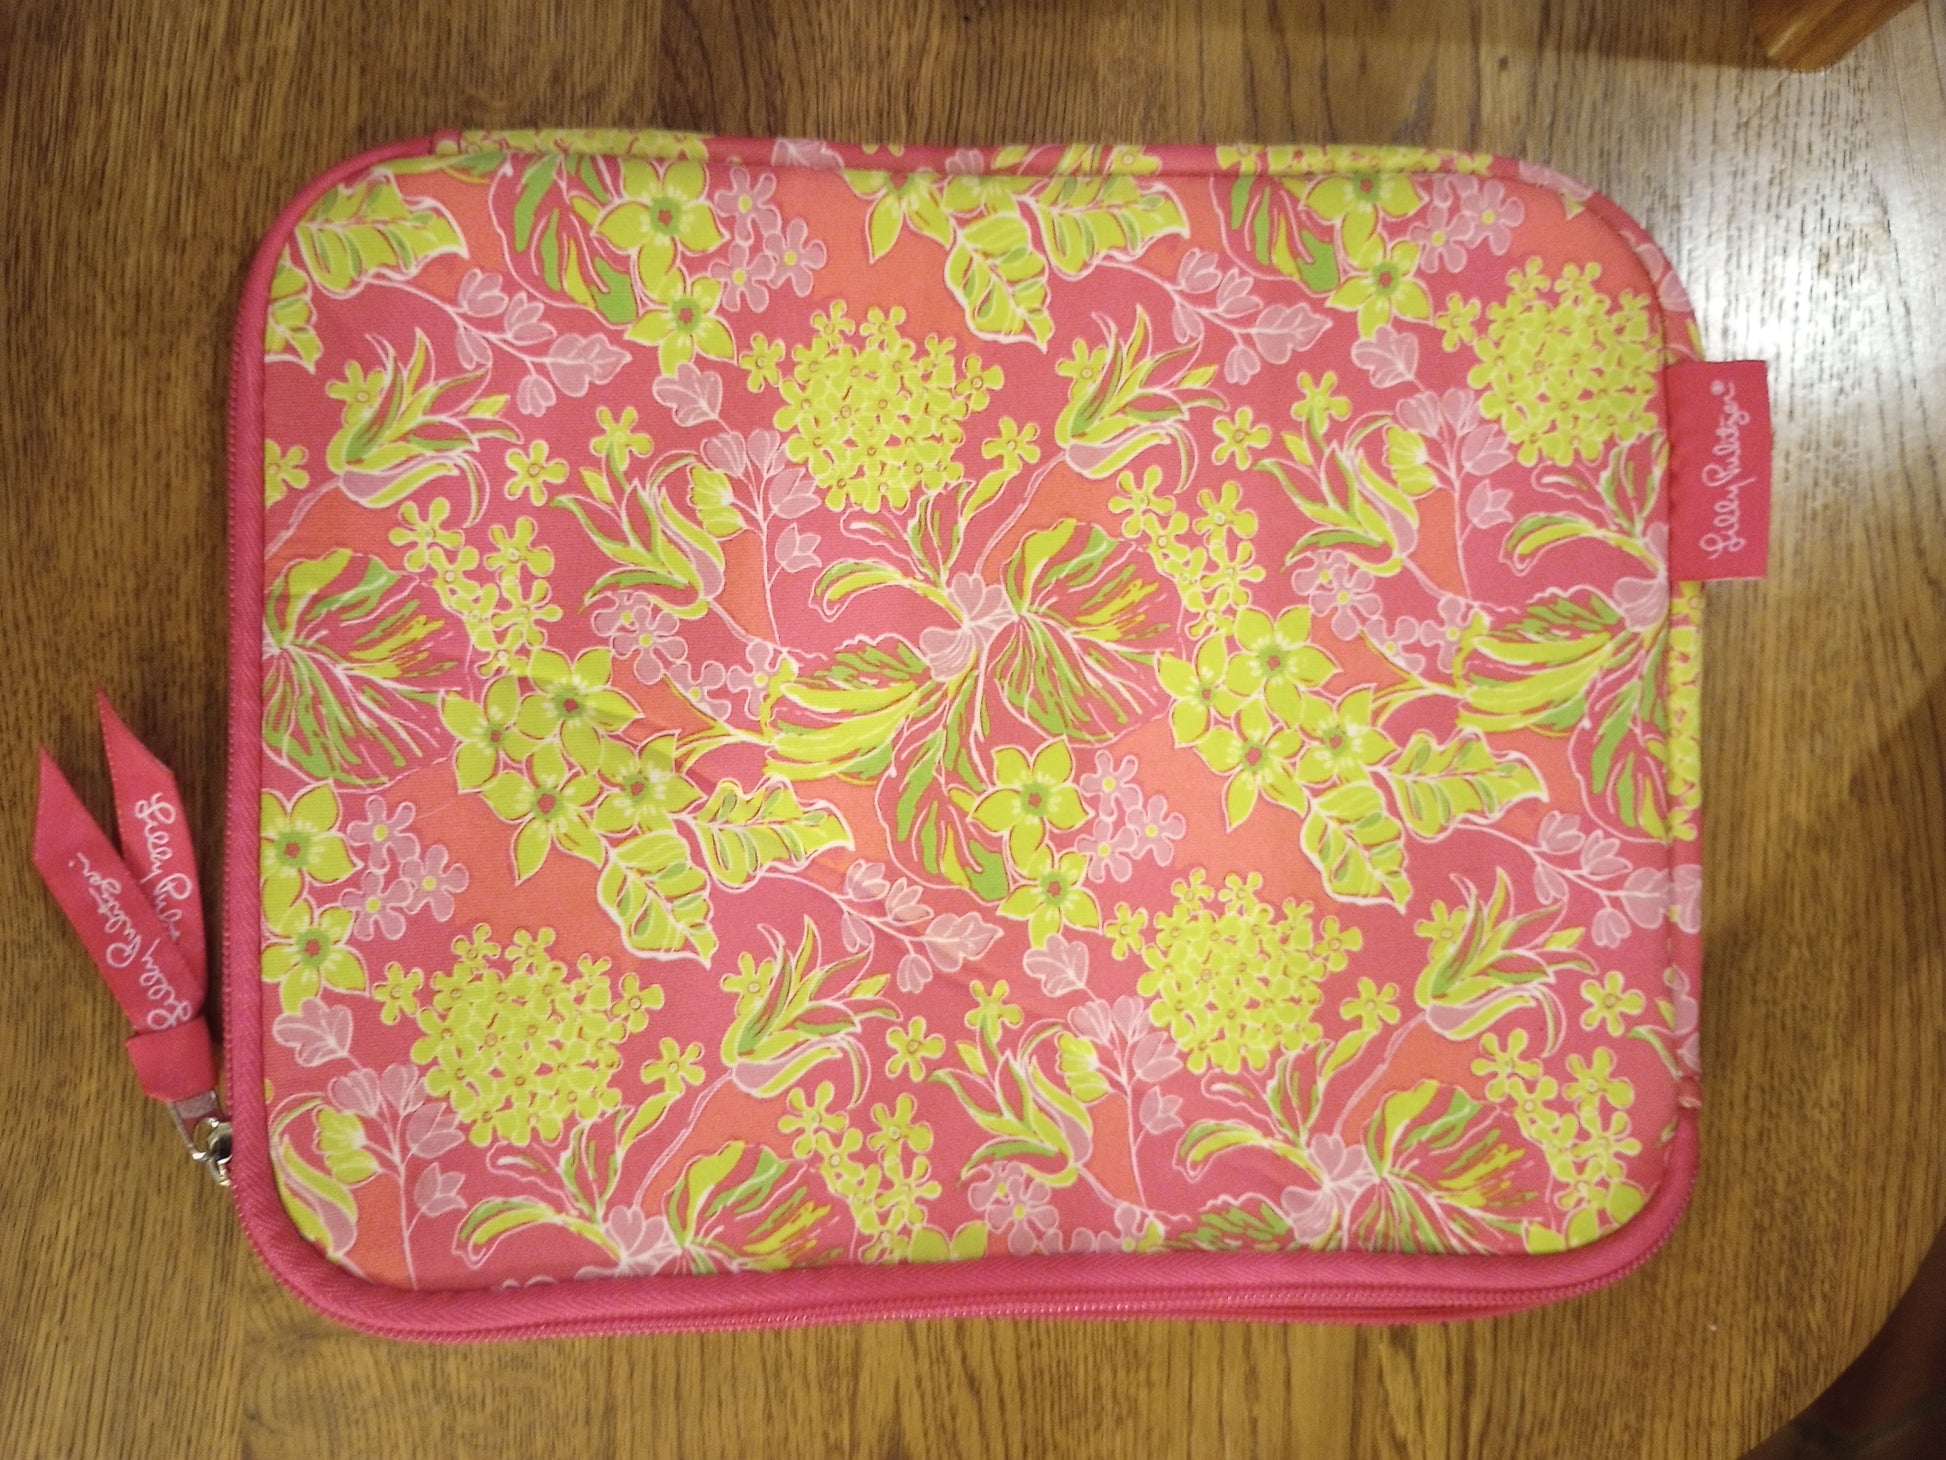  Lilly Pulitzer bag, pouch, sleeve with accessory with vivid colors and signature floral pattern.